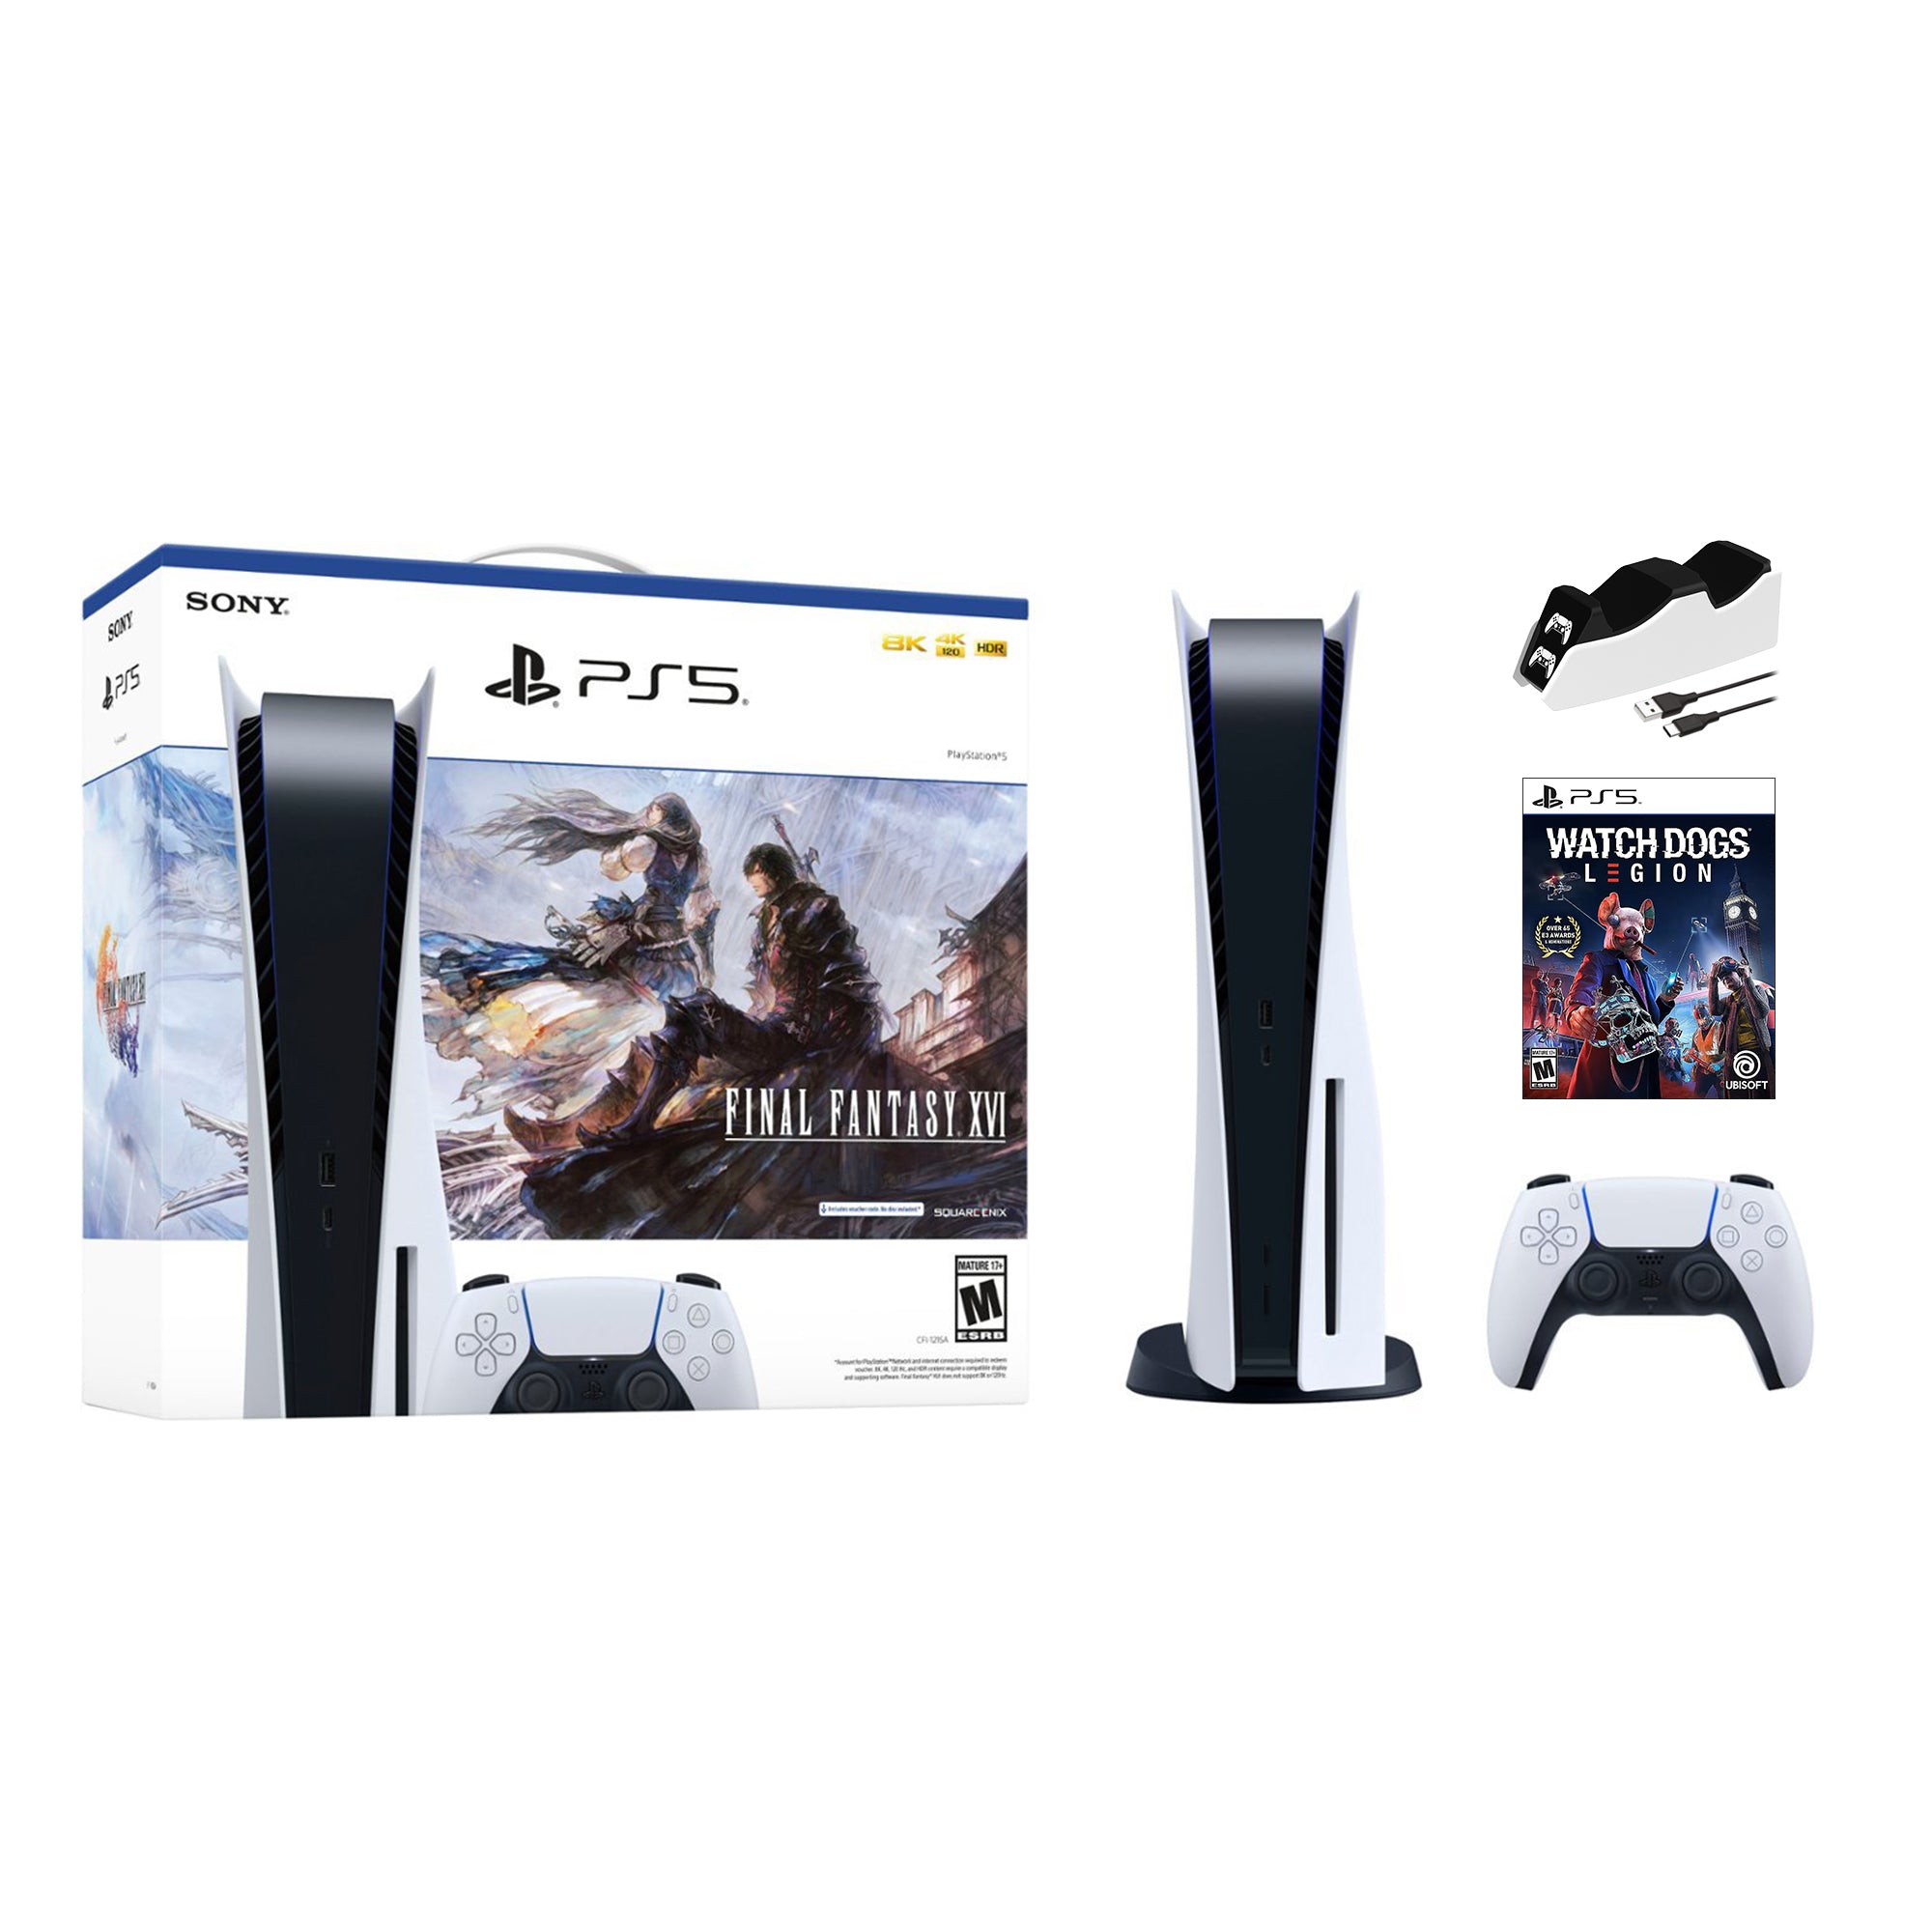 Playstation 5 Disc Edition FINAL FANTASY XVI Bundle with Watch Dogs Legions and Mytrix Controller Charger - PS5, White